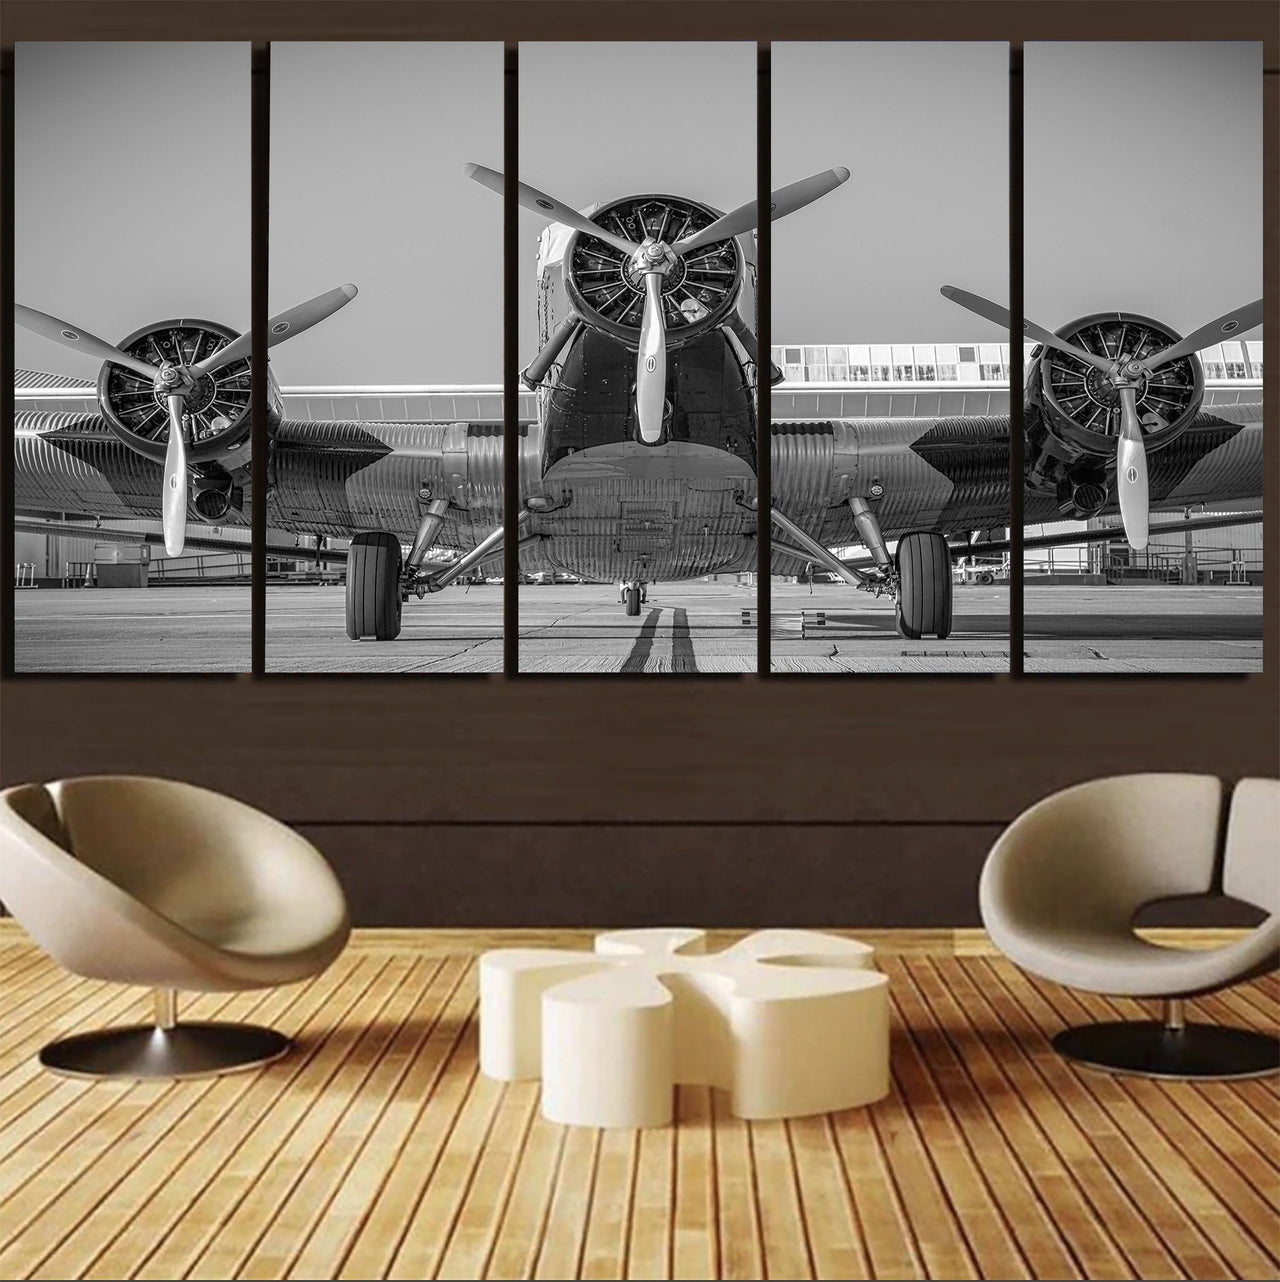 Face to Face to 3 Engine Old Airplane Printed Canvas Prints (5 Pieces) Aviation Shop 